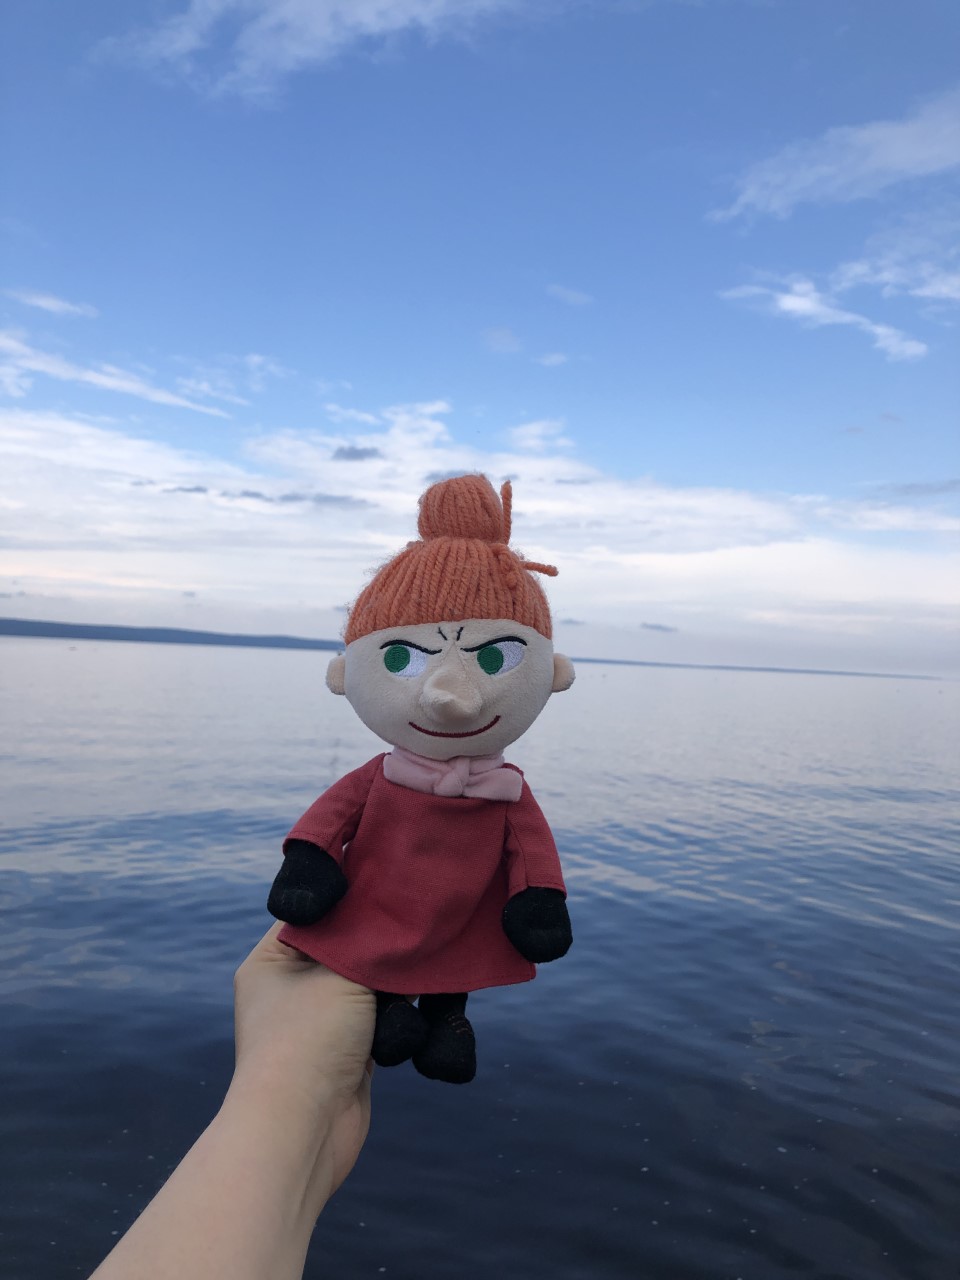 A hand holding a Pikku My toy by the lake.